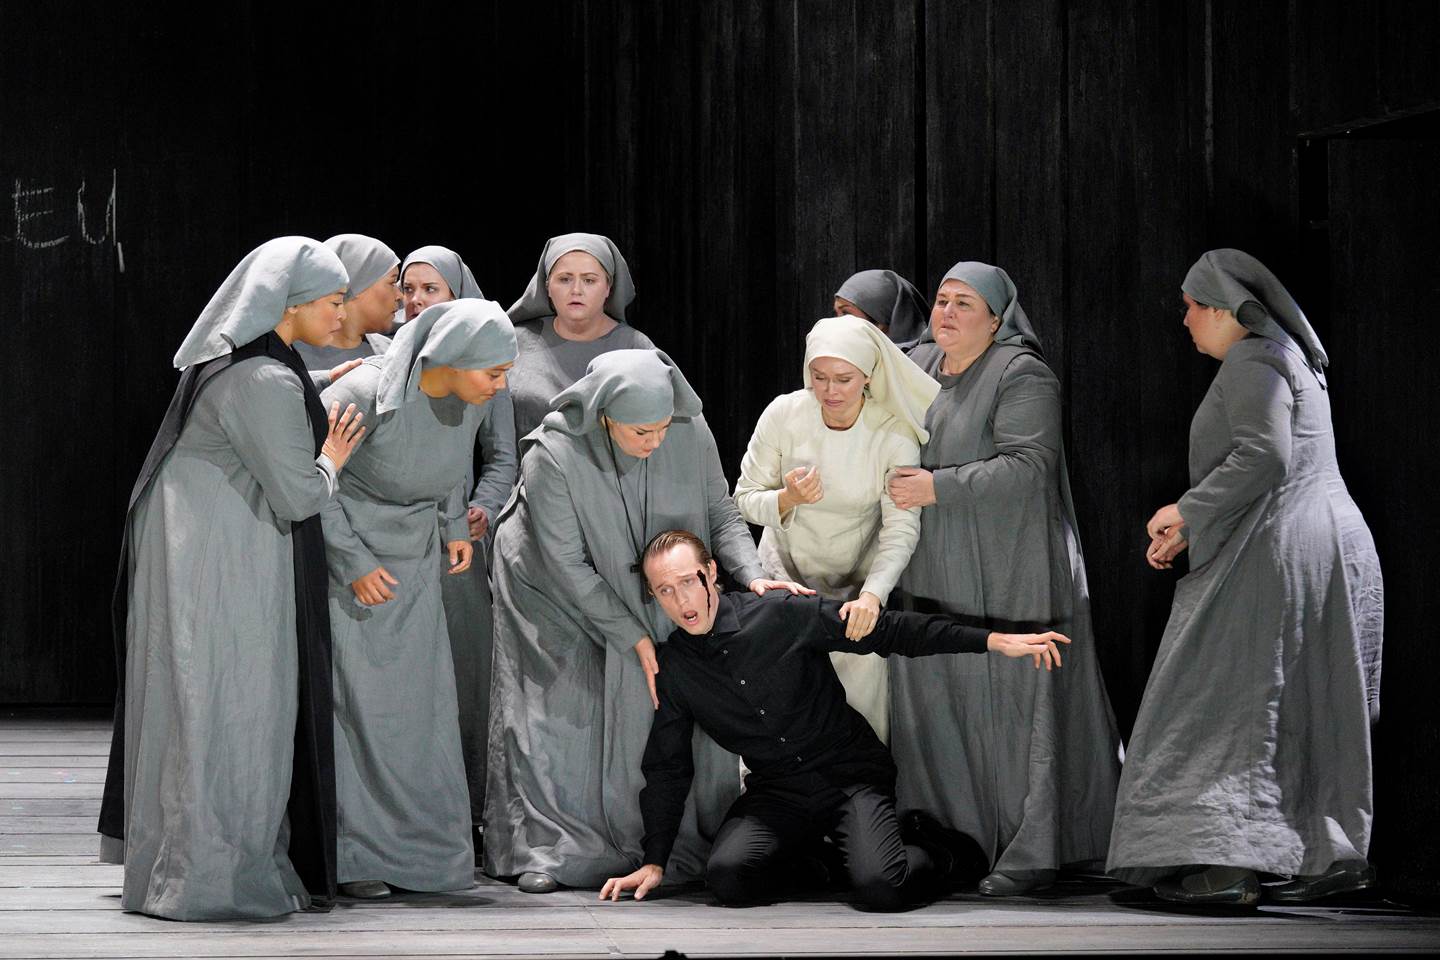  Dialogues of the Carmelites